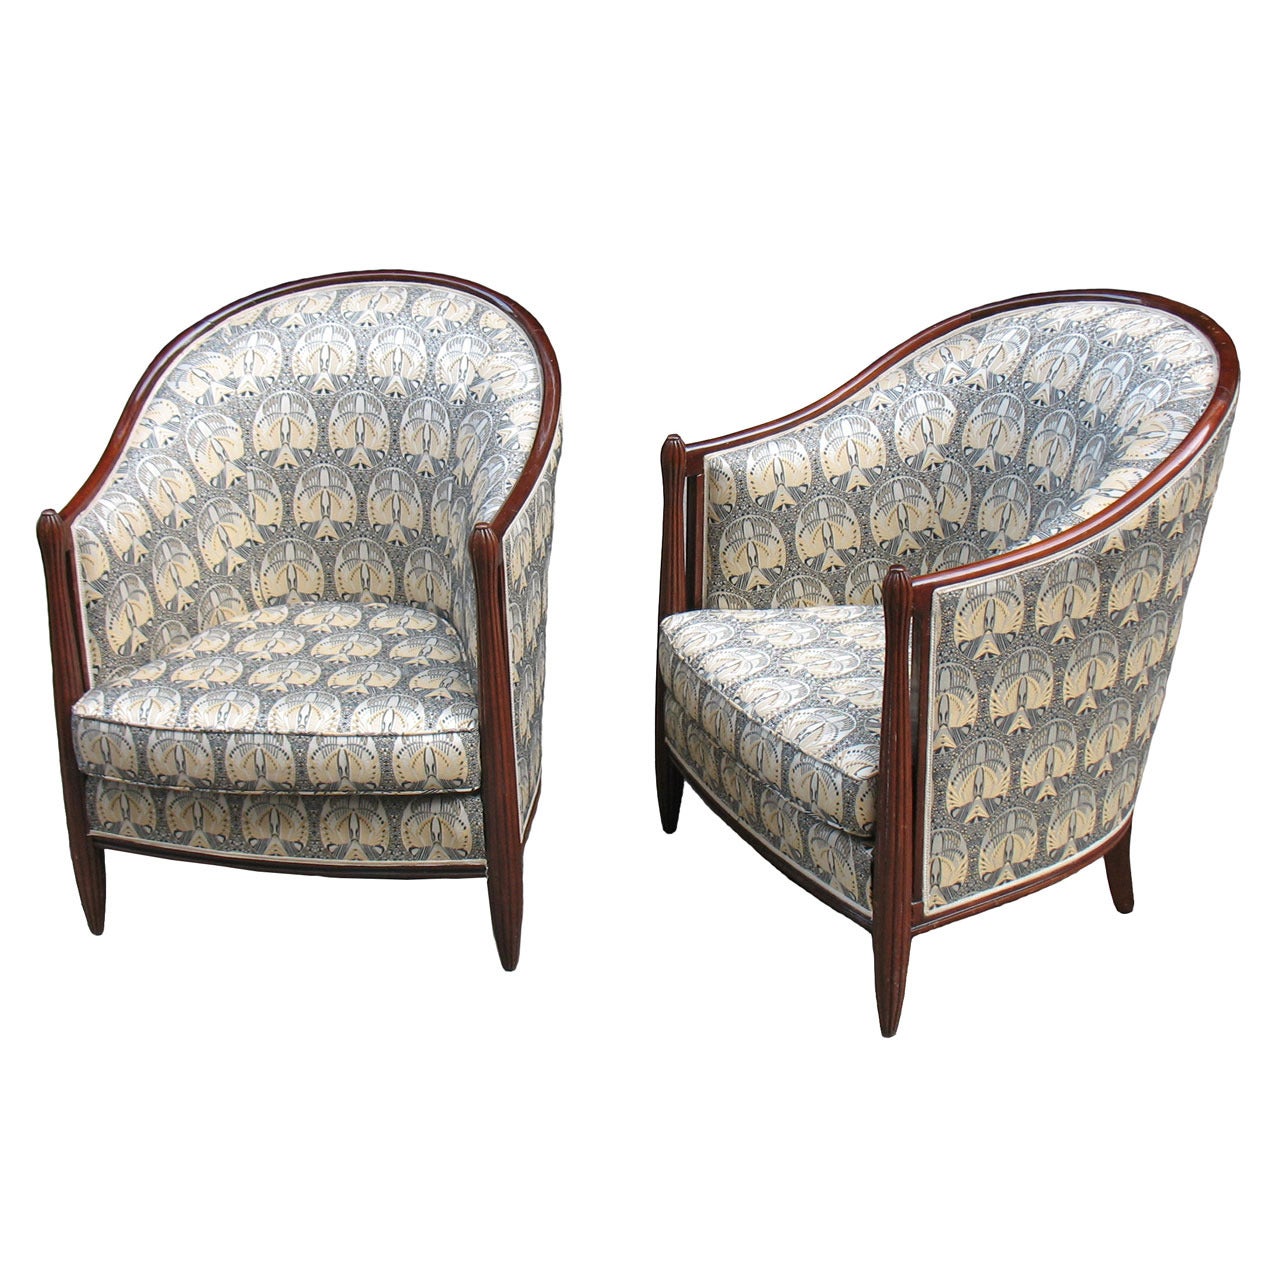 Pair of French Art Deco Bergeres in the Style of Follot